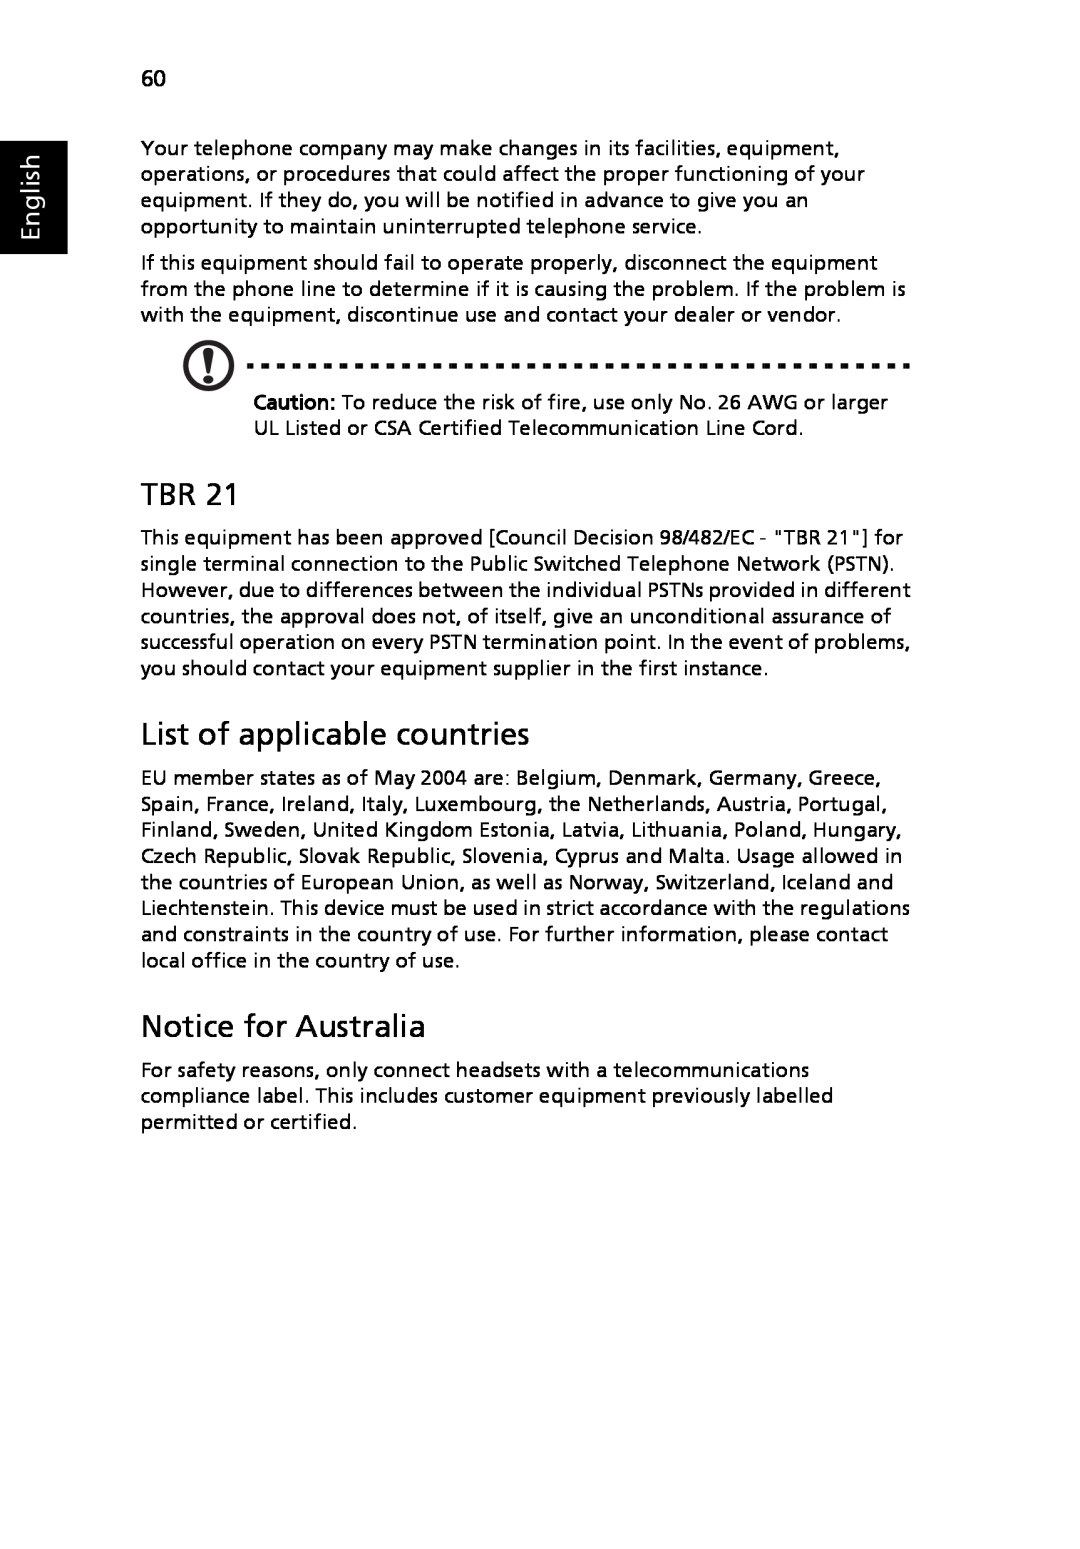 Acer 3630 manual List of applicable countries, Notice for Australia, English 